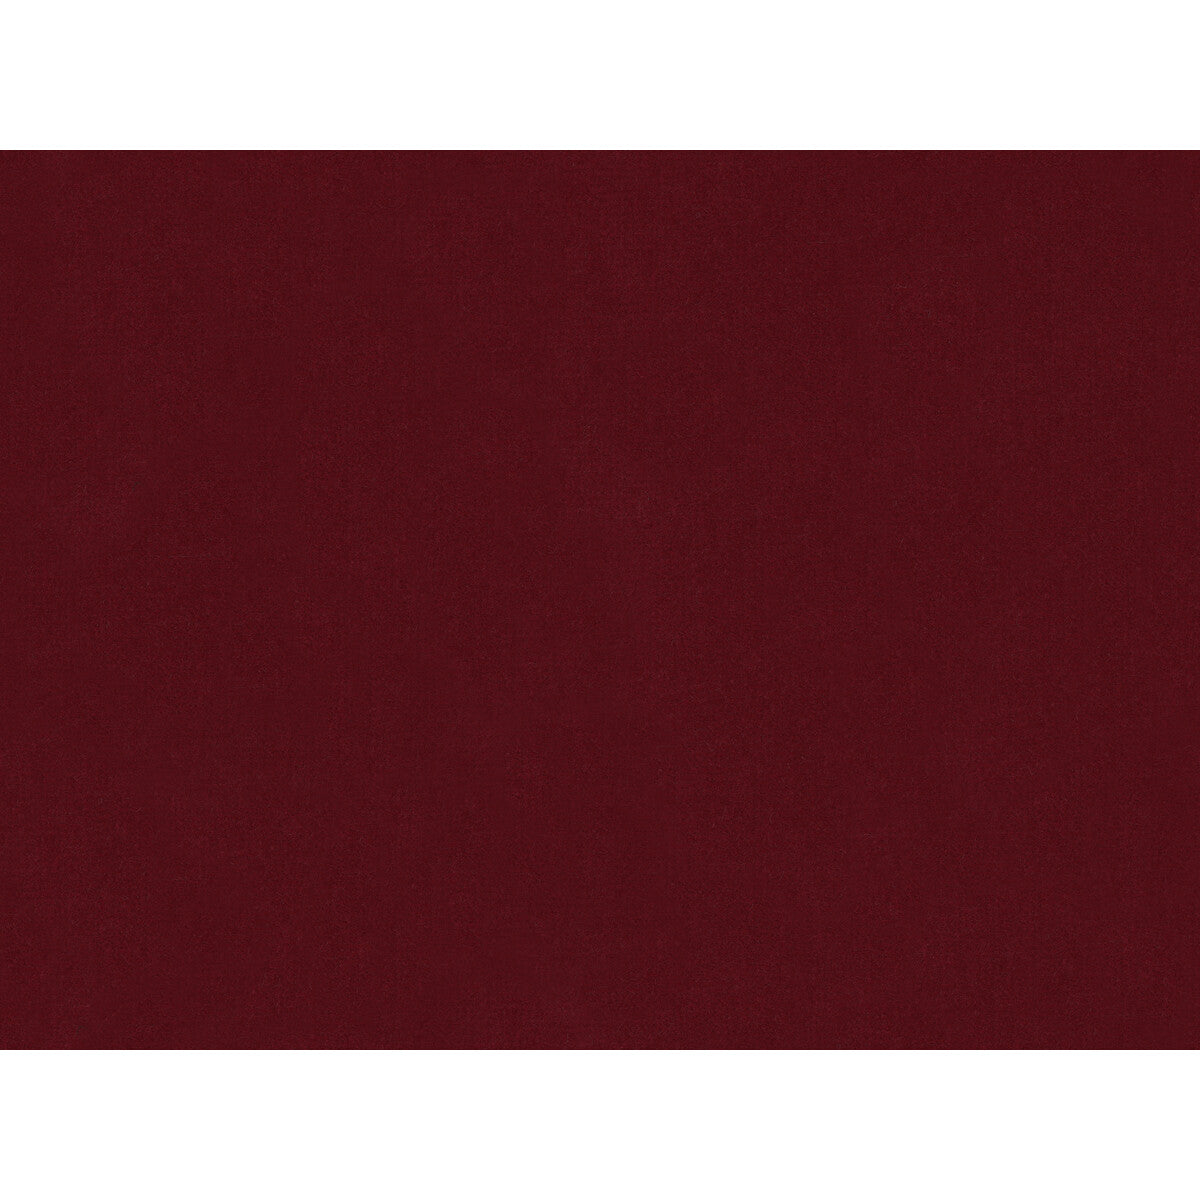 Oxford Velvet fabric in cherry color - pattern 2016122.19.0 - by Lee Jofa